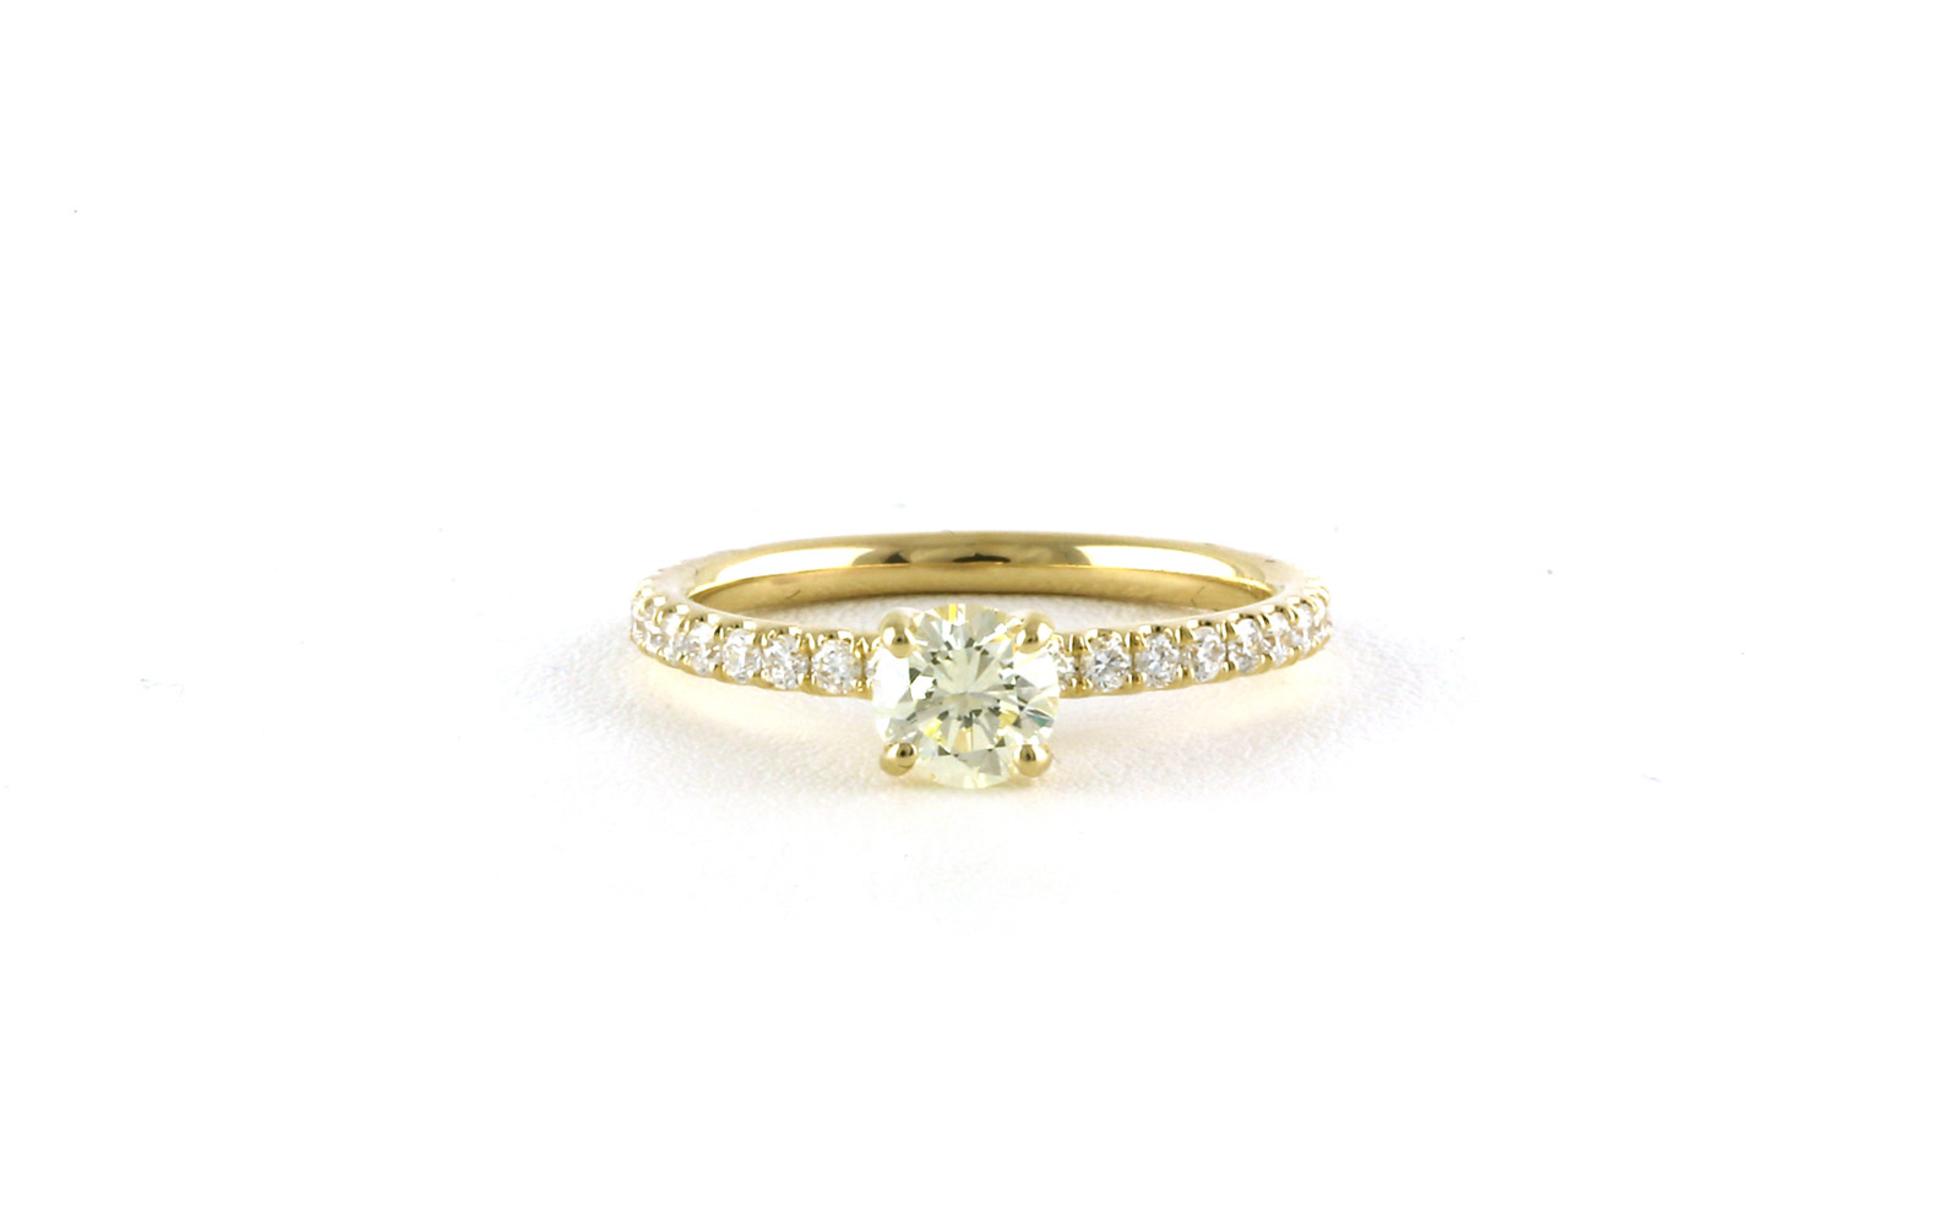 Pave Shank Diamond Engagement Ring in Yellow Gold (1.02cts TWT)